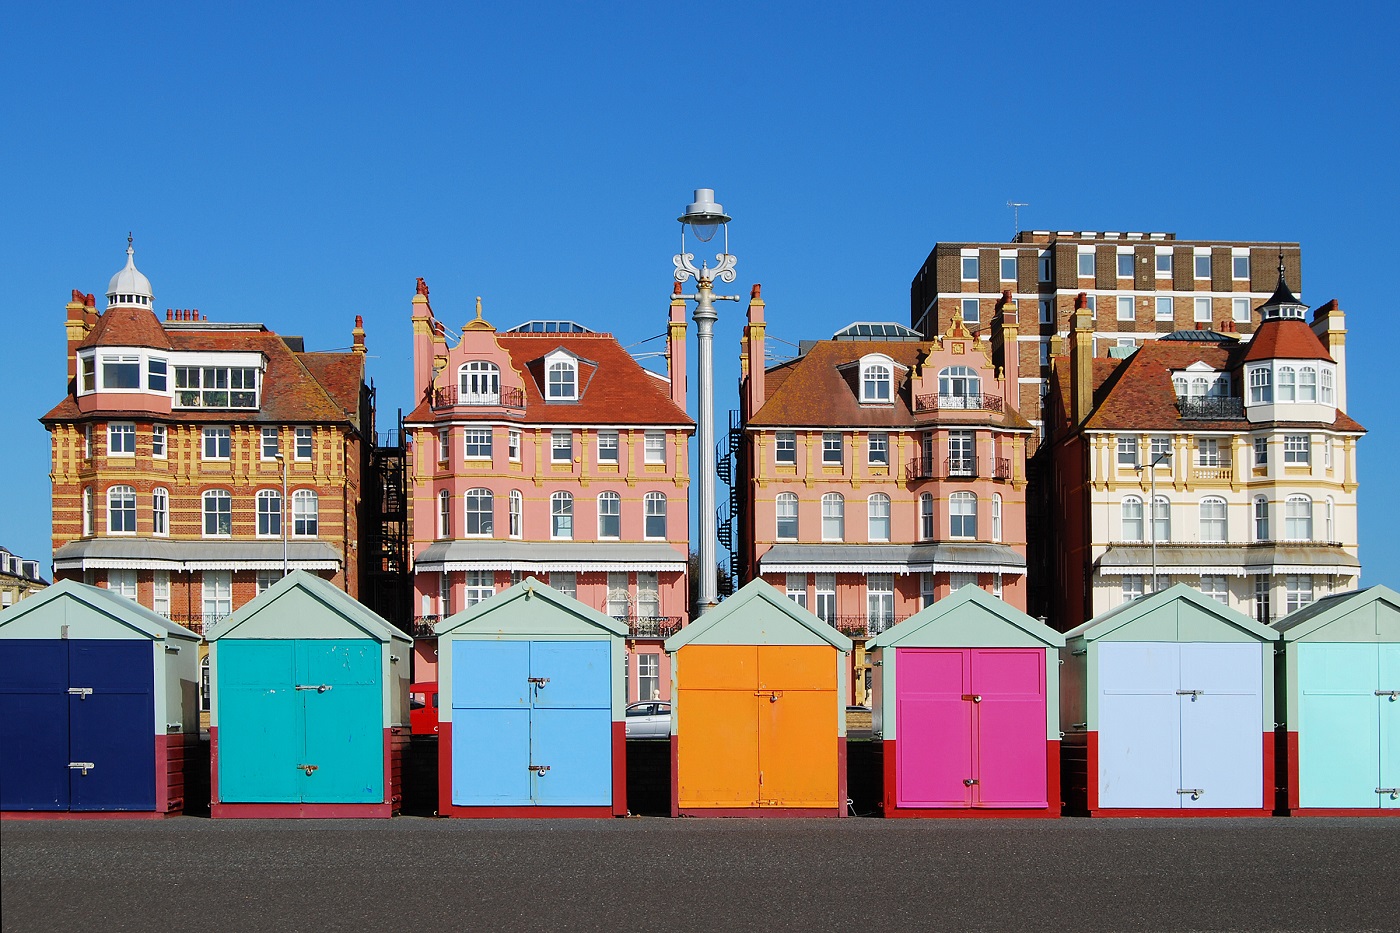 Brighton beach is home to iconic colourful beach huts